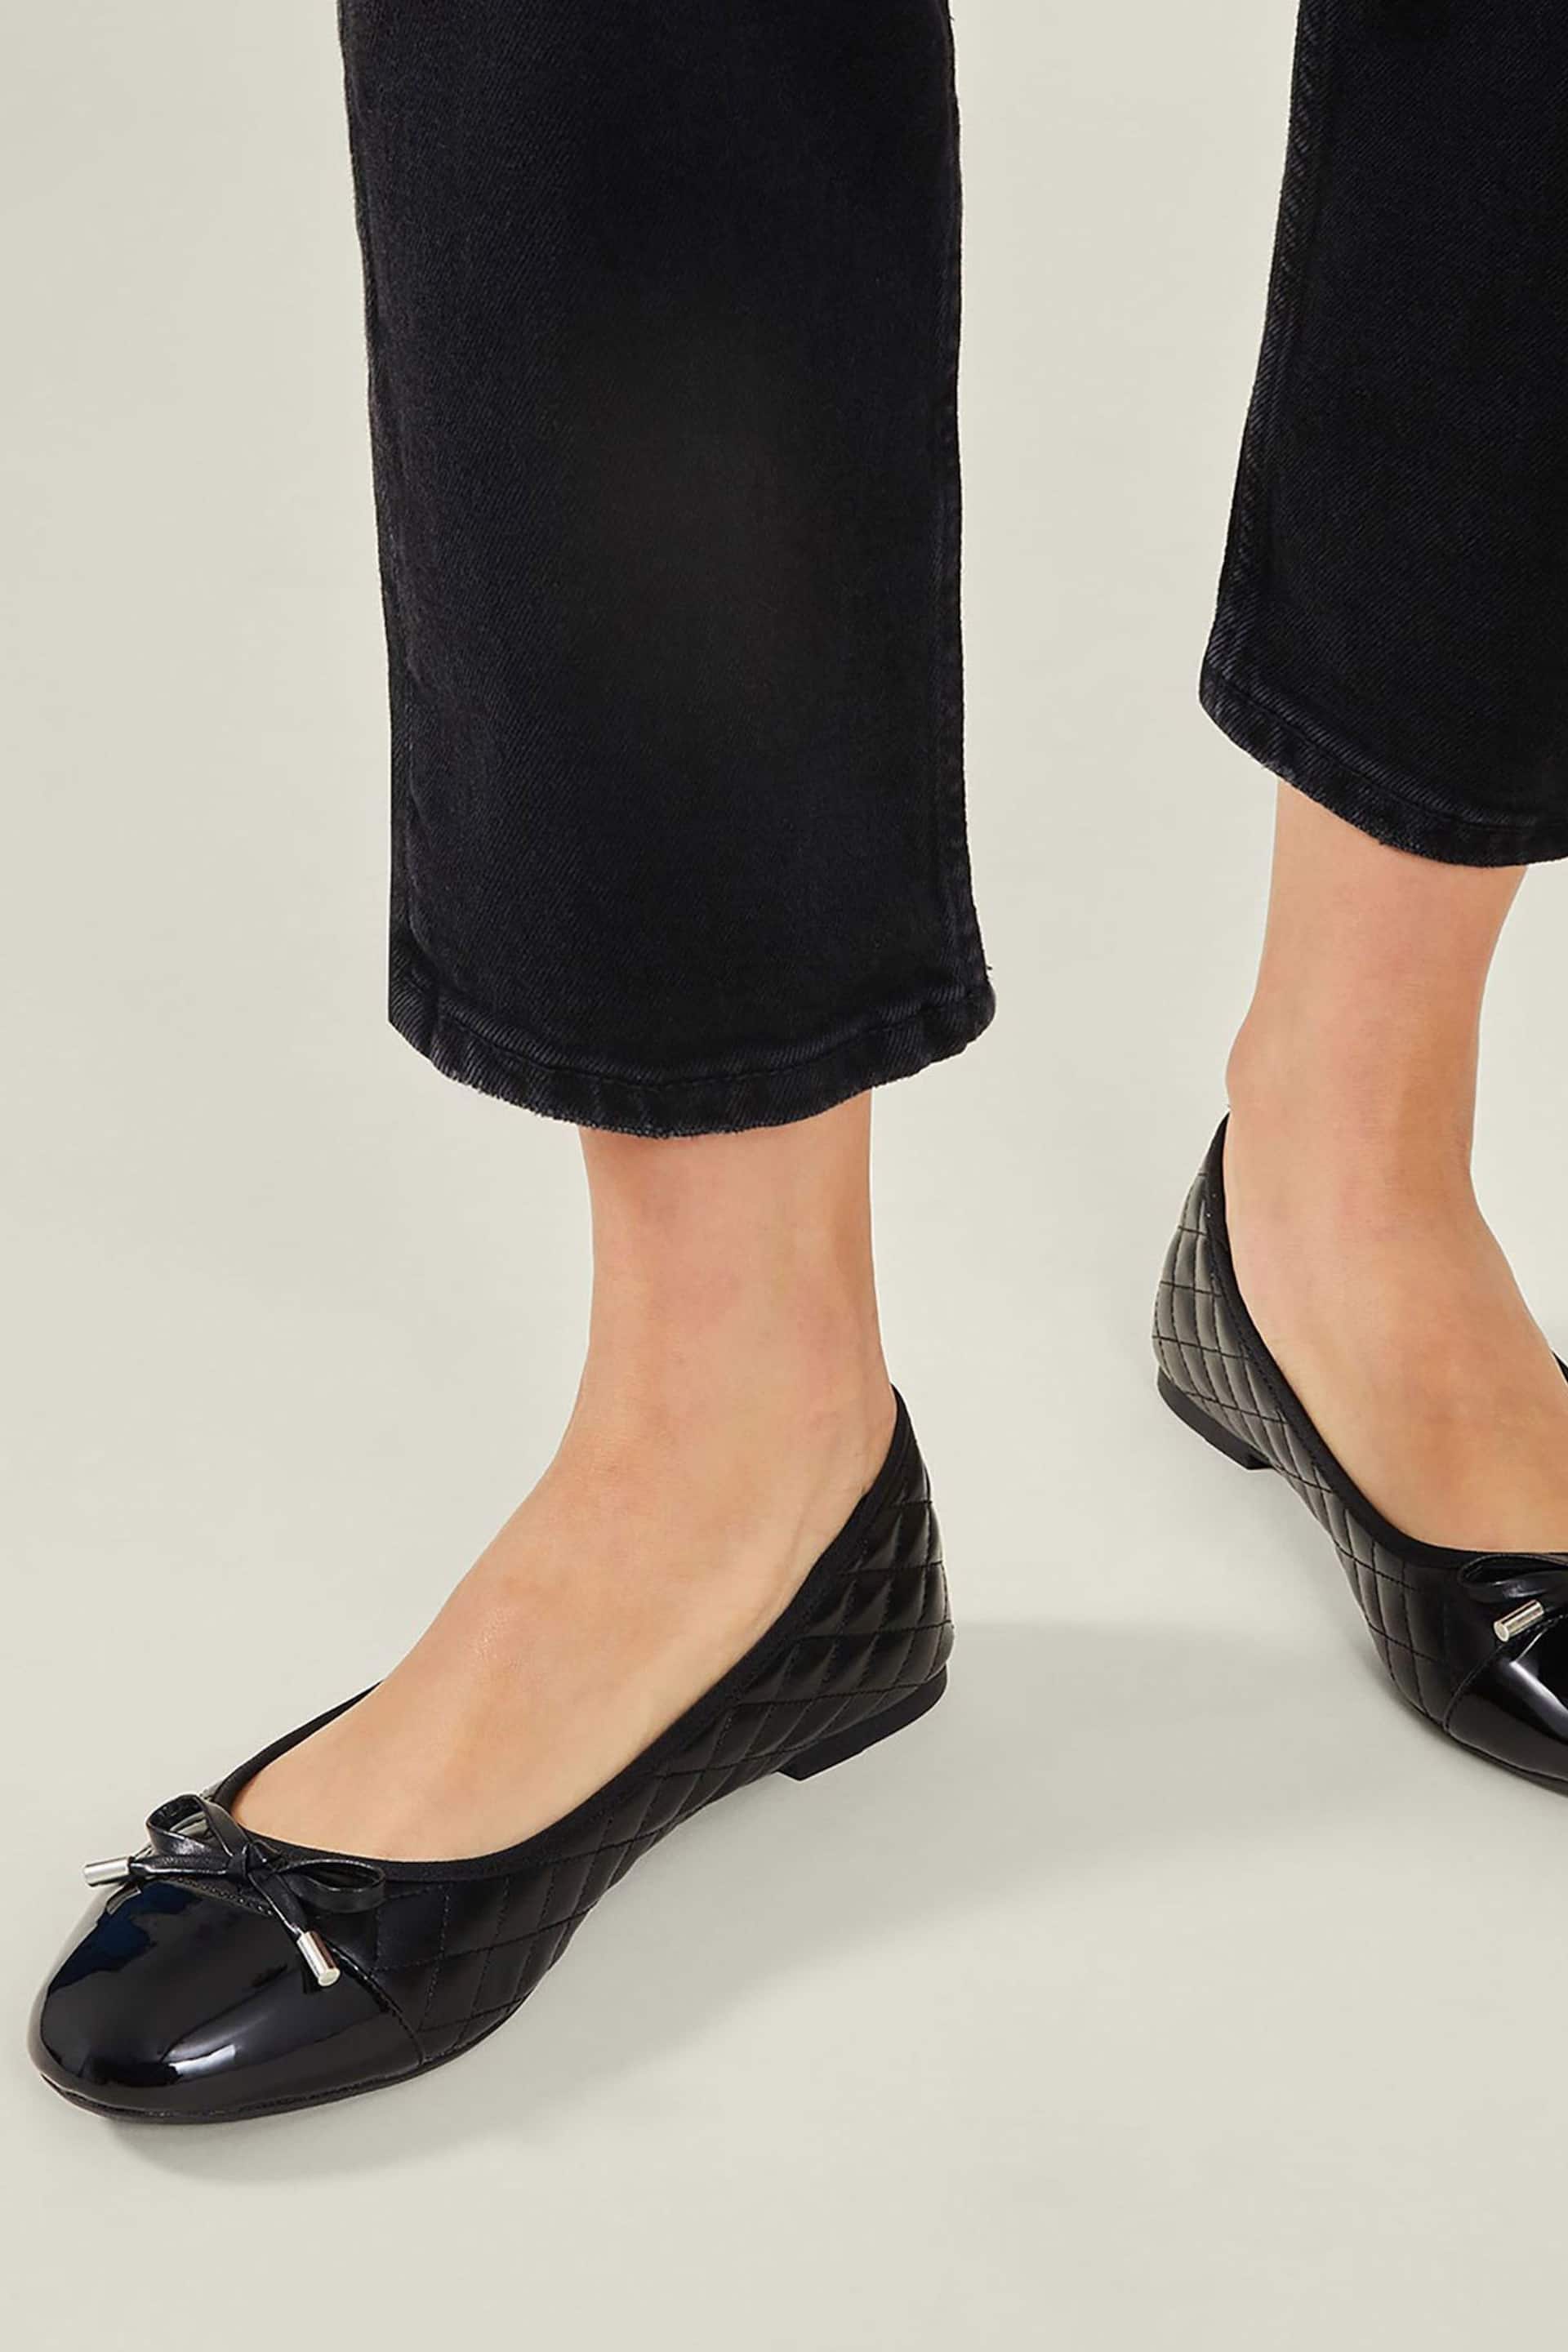 Accessorize Black Quilted Ballet Flats - Image 4 of 4